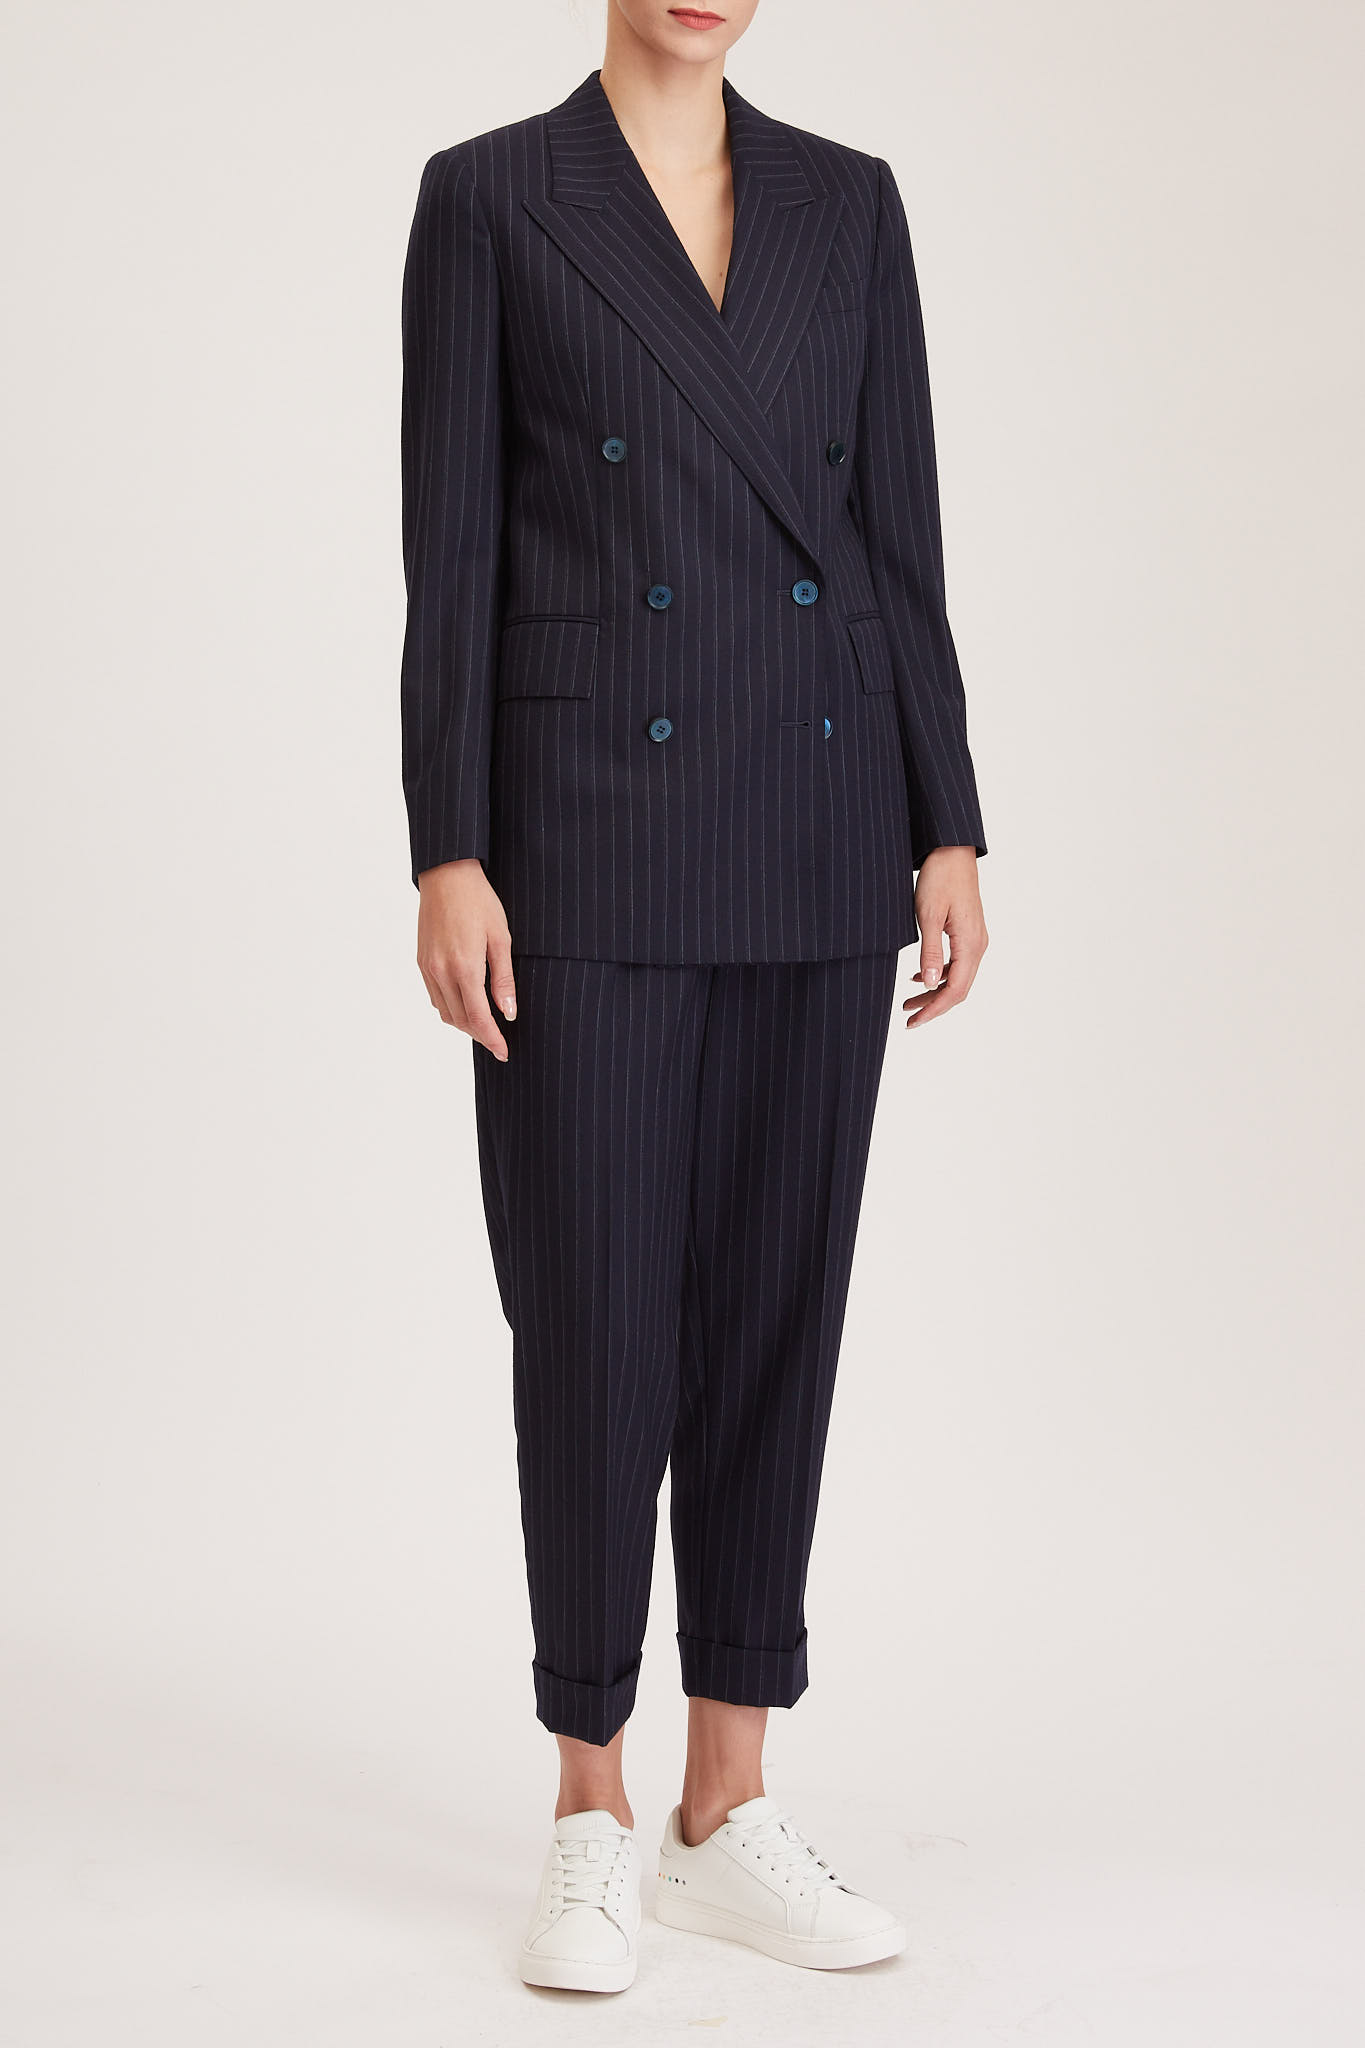 Bristol Jacket – Classic double breasted suit jacket in navy wool